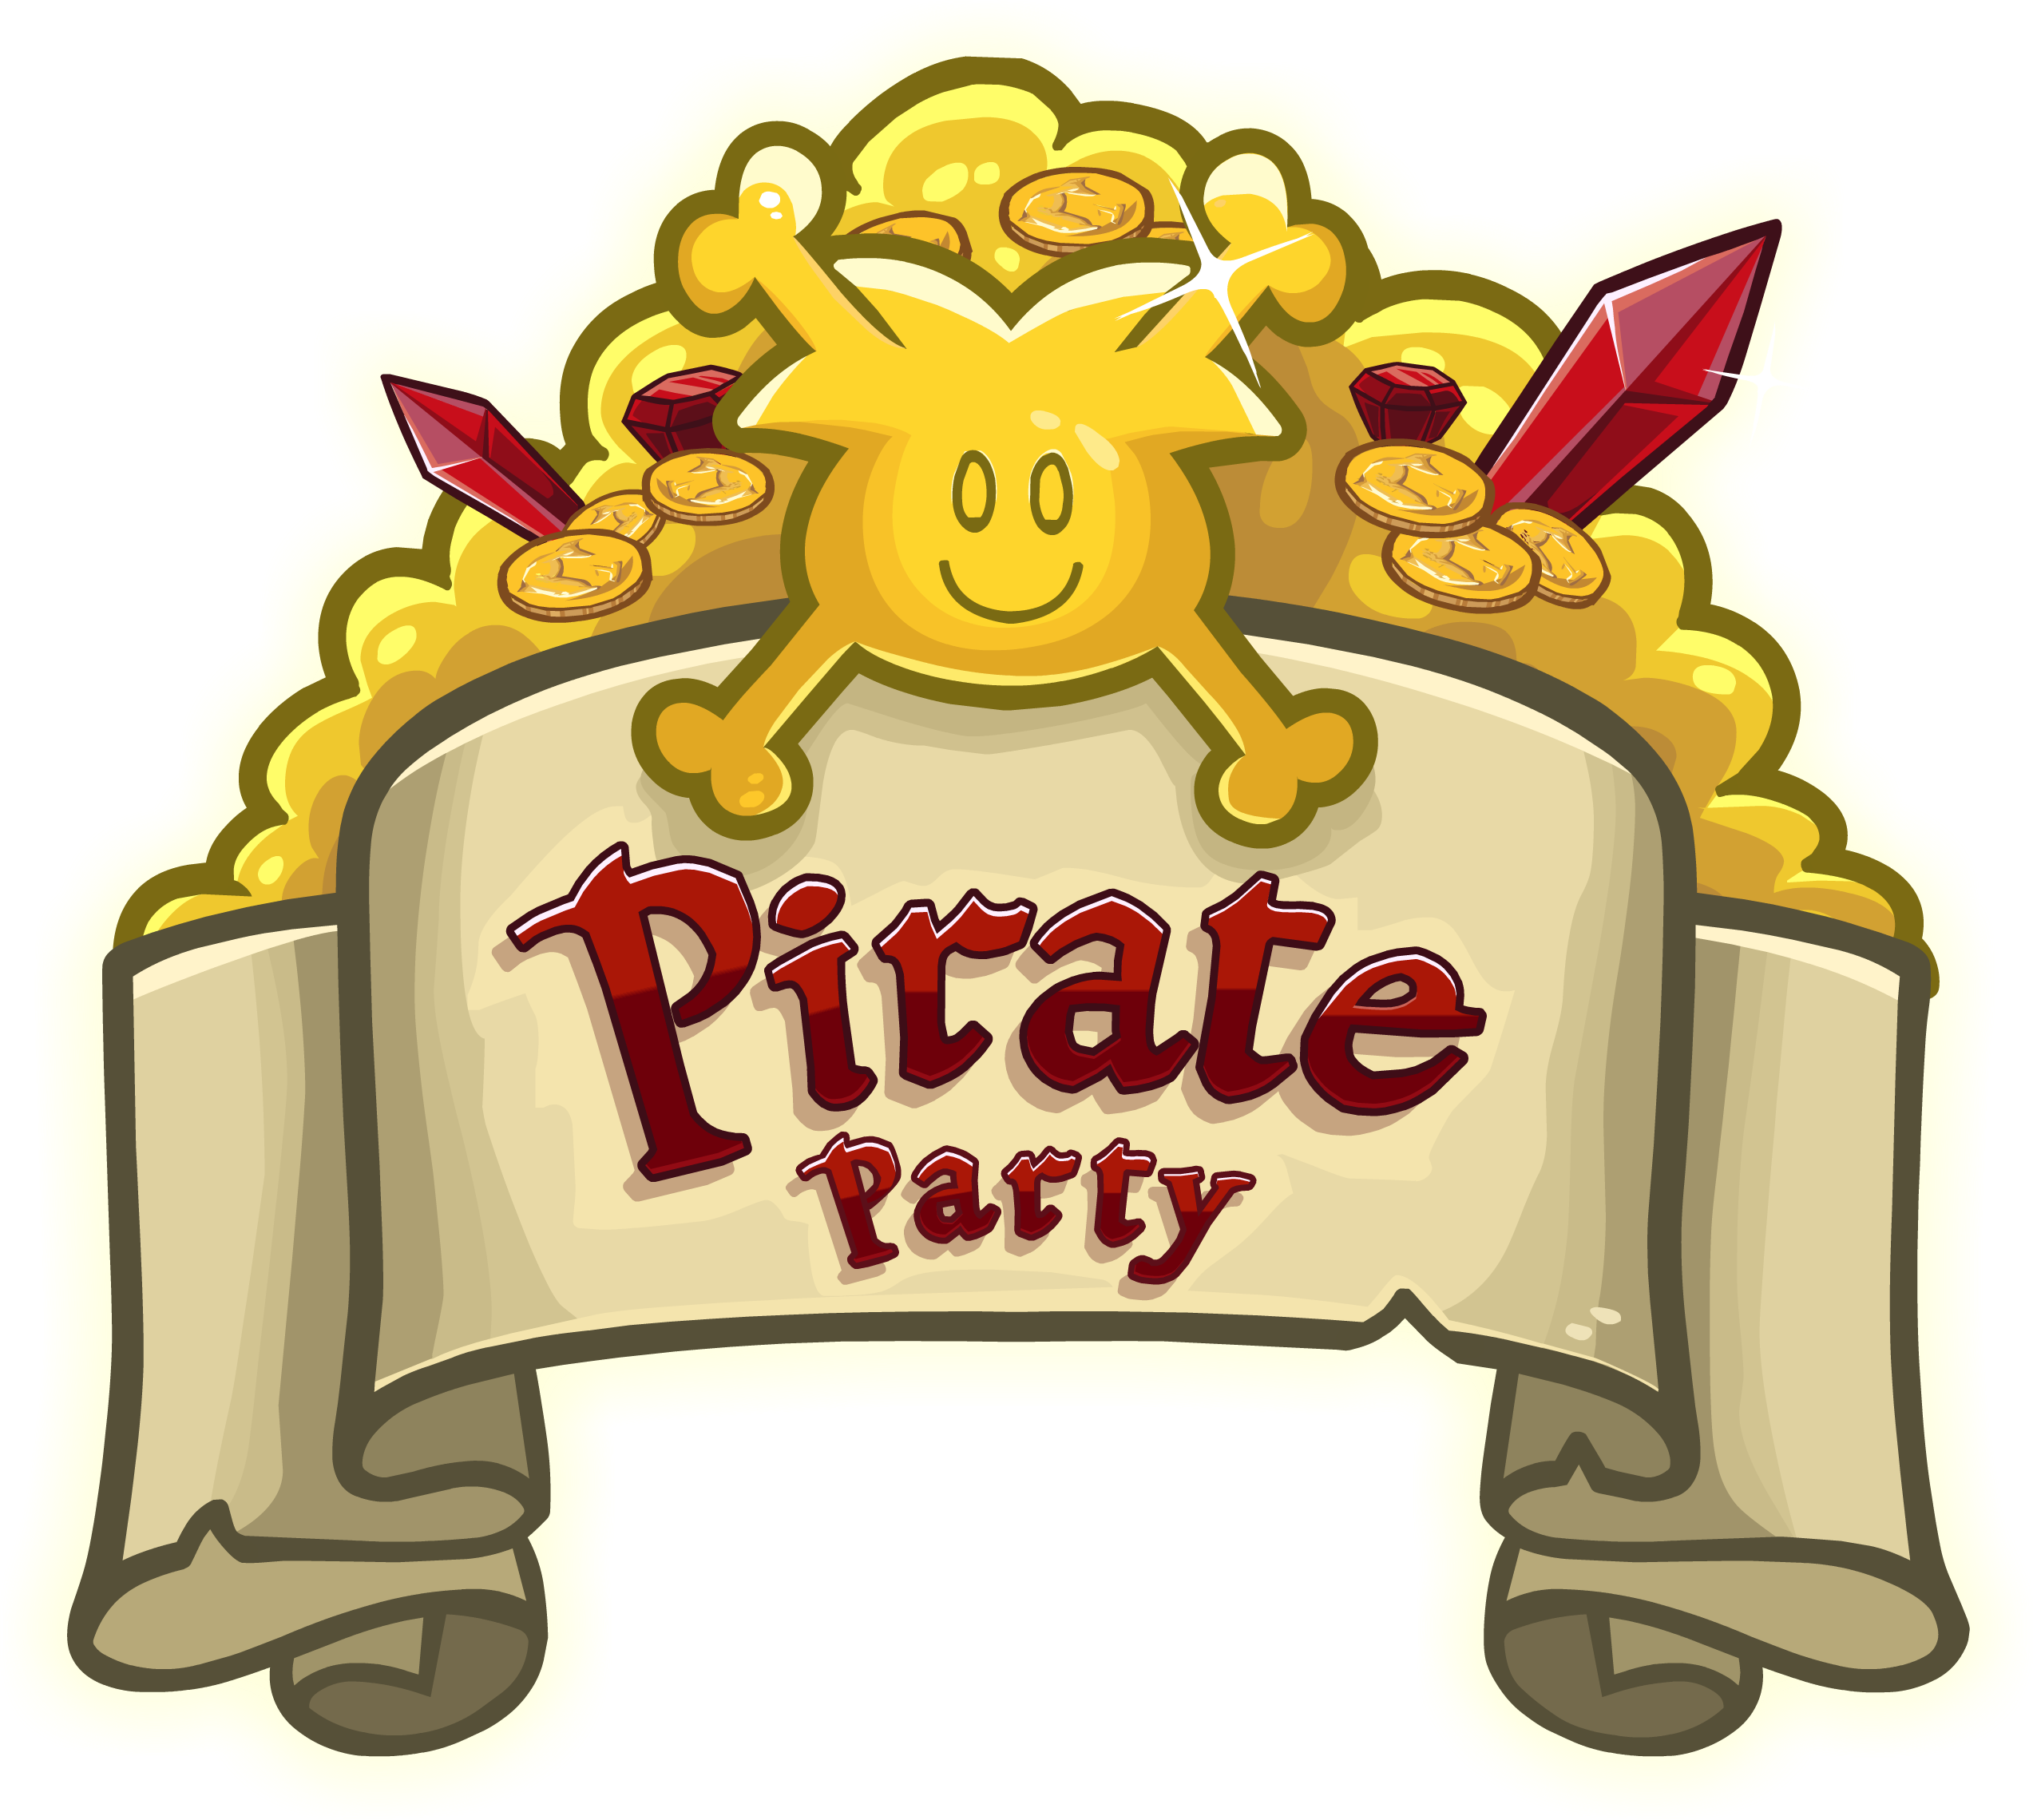 Image party logo png. Pants clipart pirate